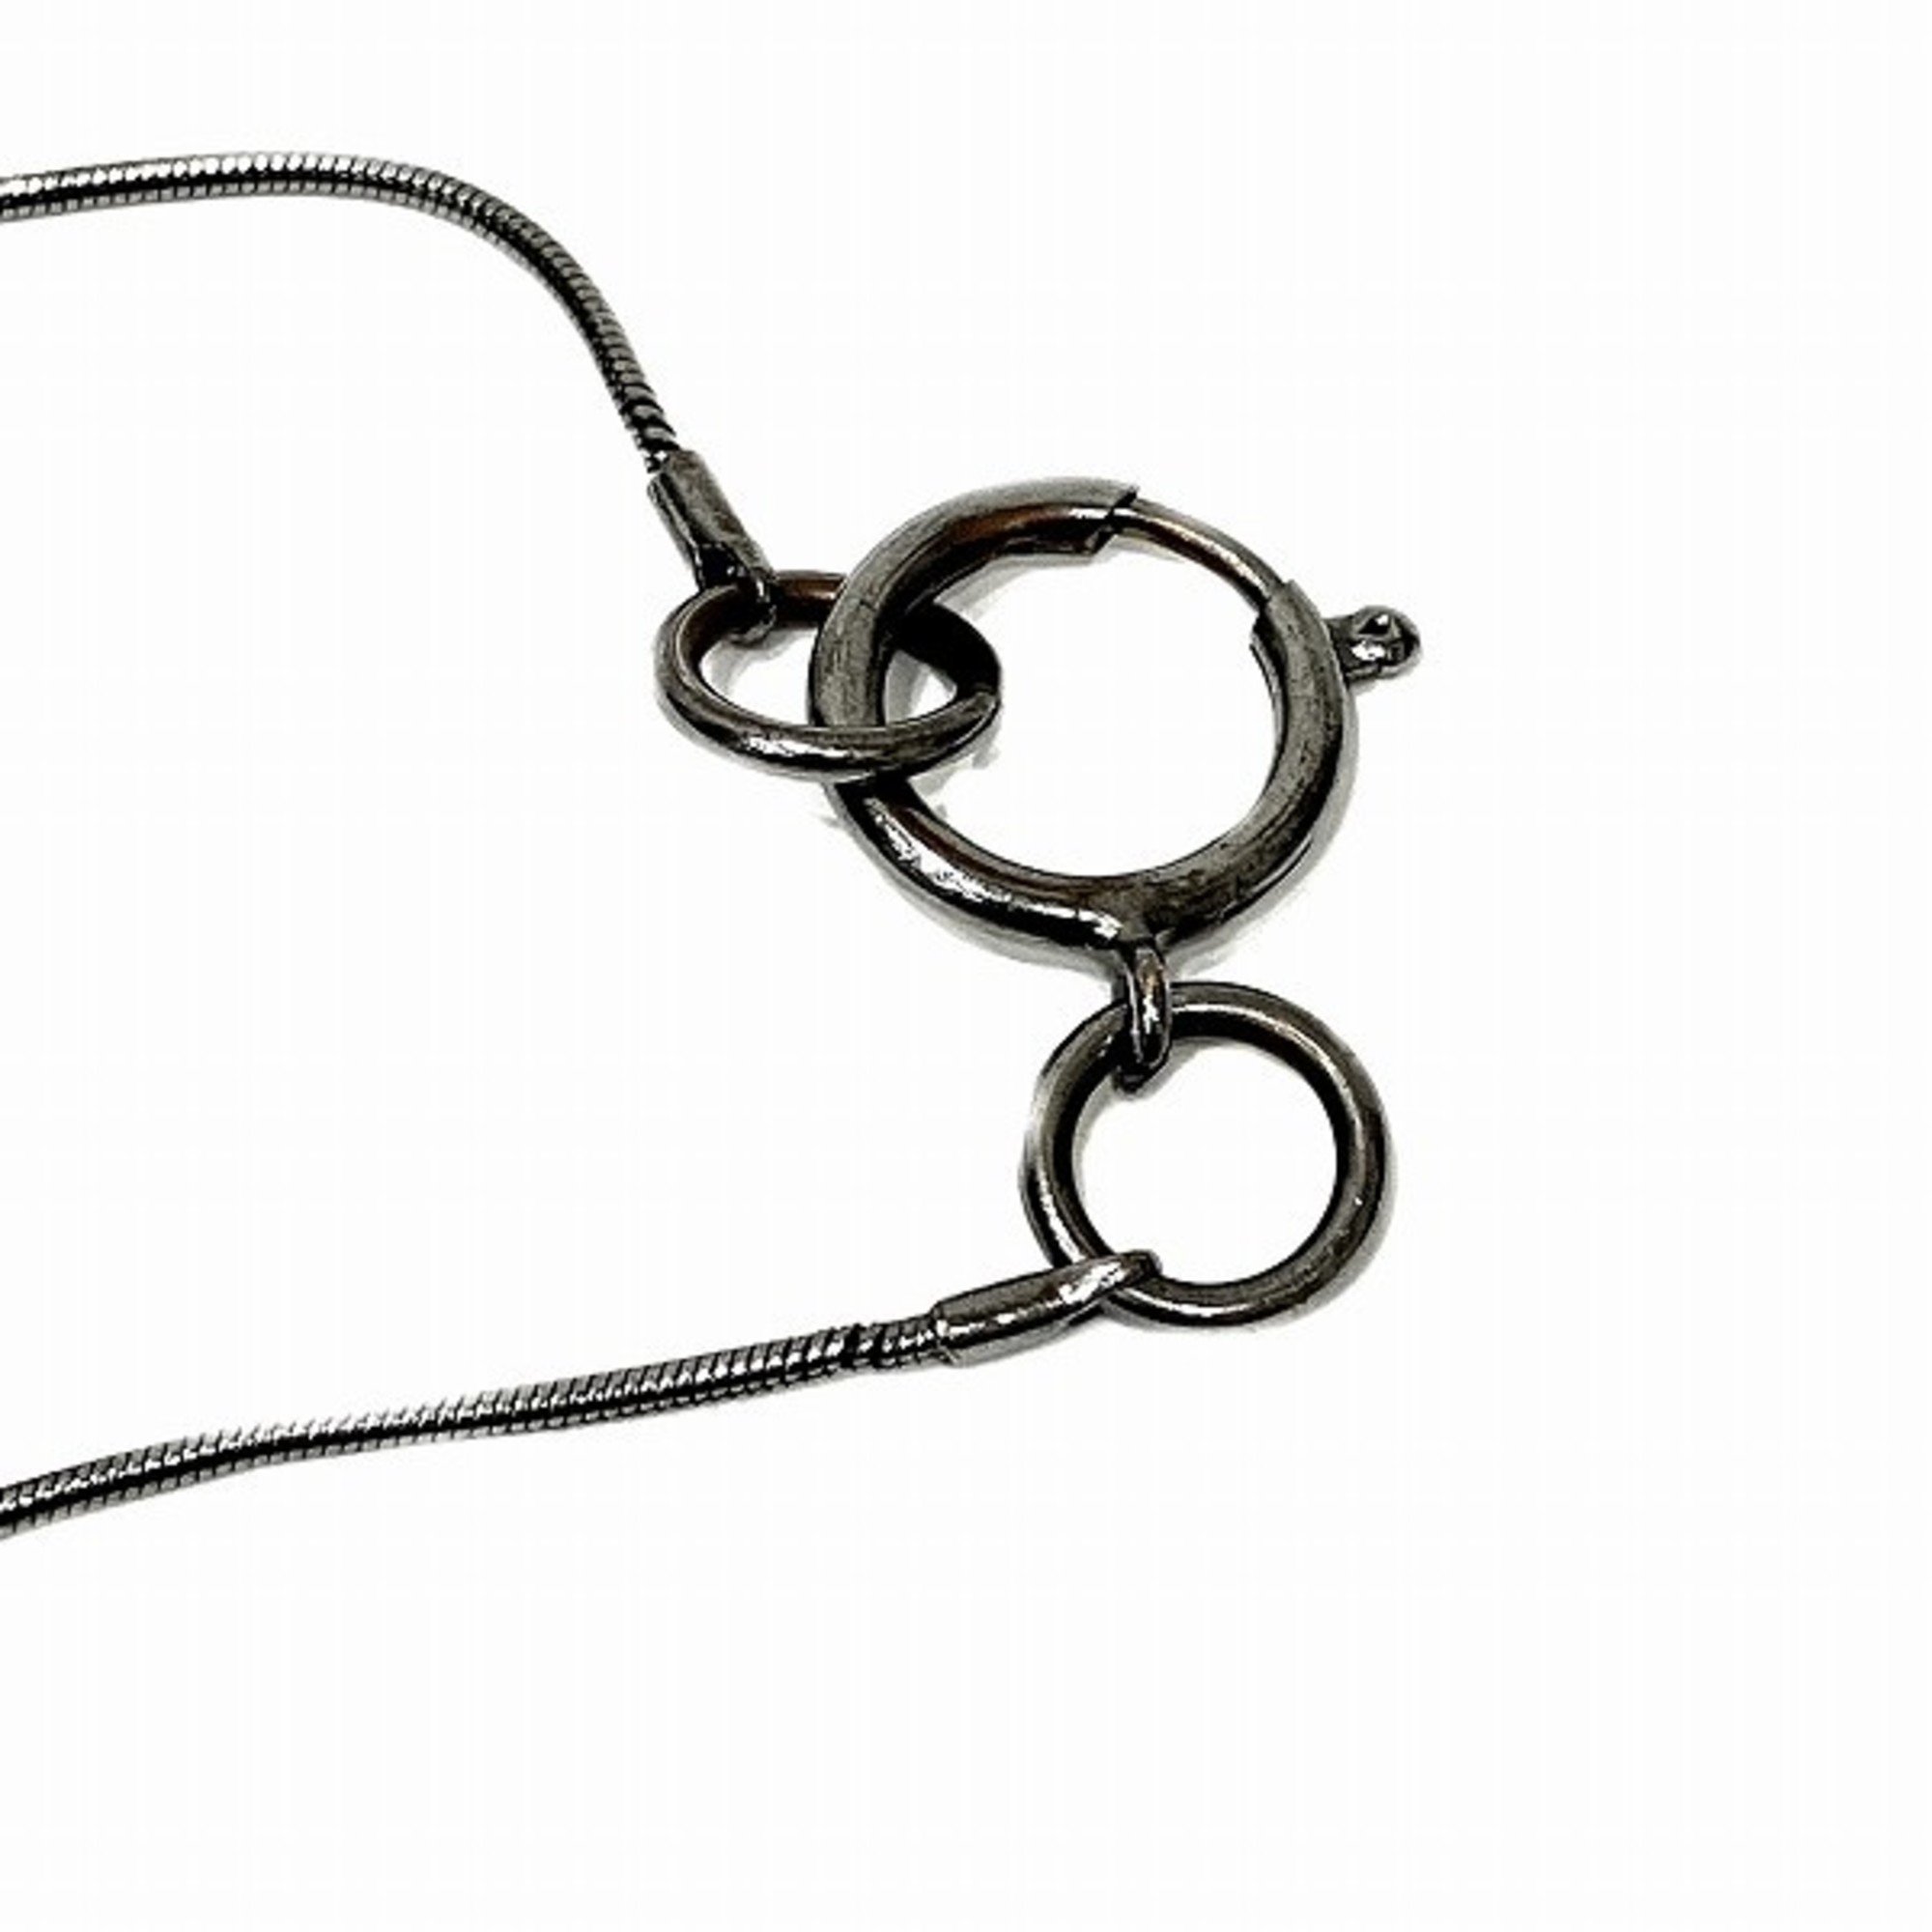 CHANEL Mademoiselle Long Necklace Brand Accessories Women's